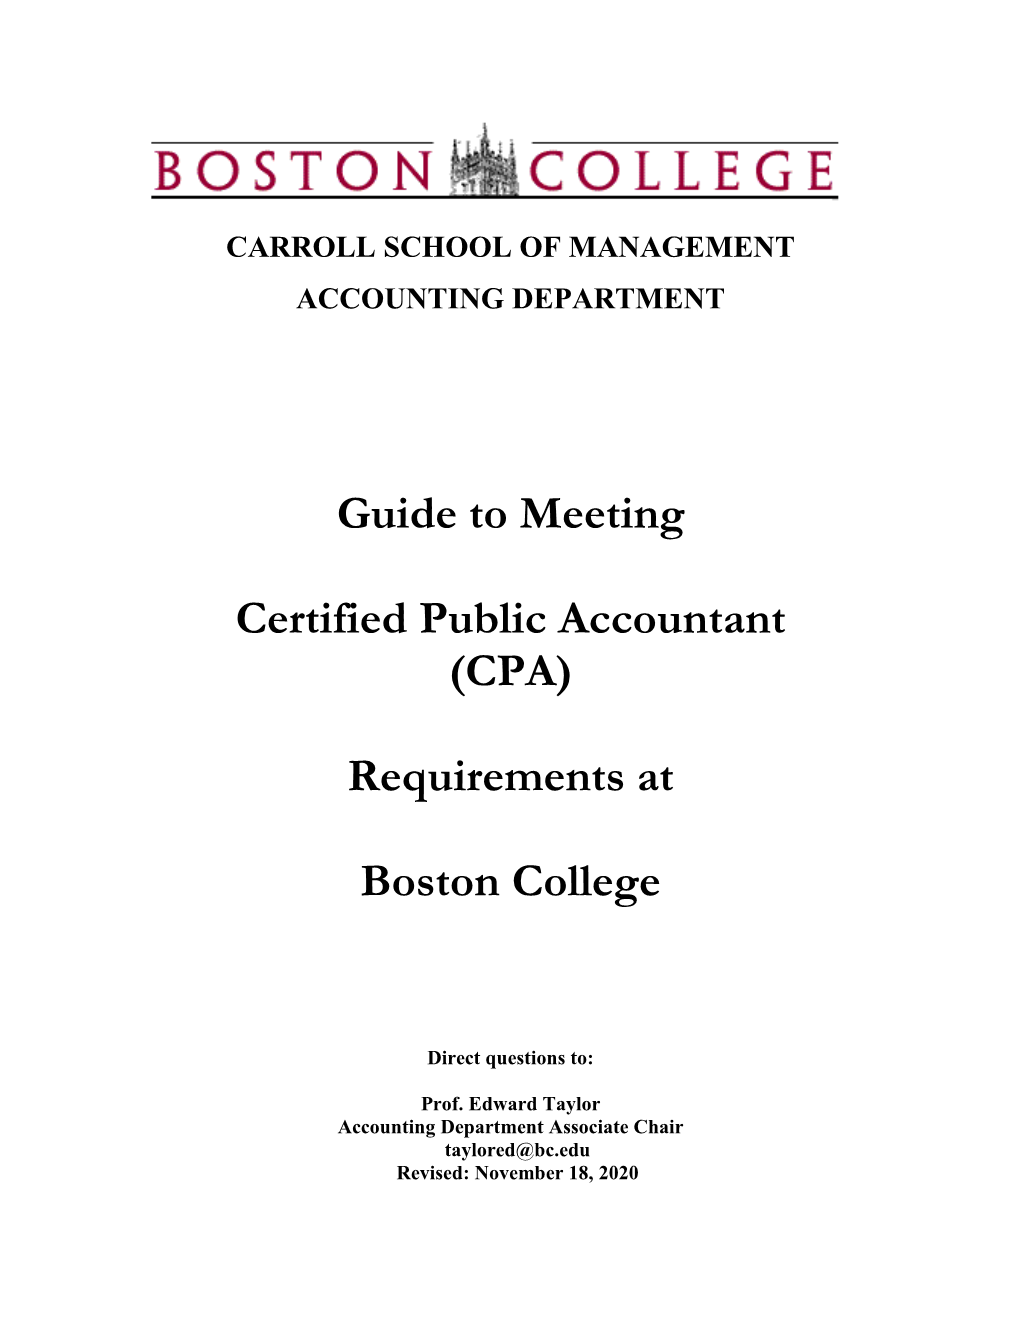 Guide to Meeting Certified Public Accountant (CPA)